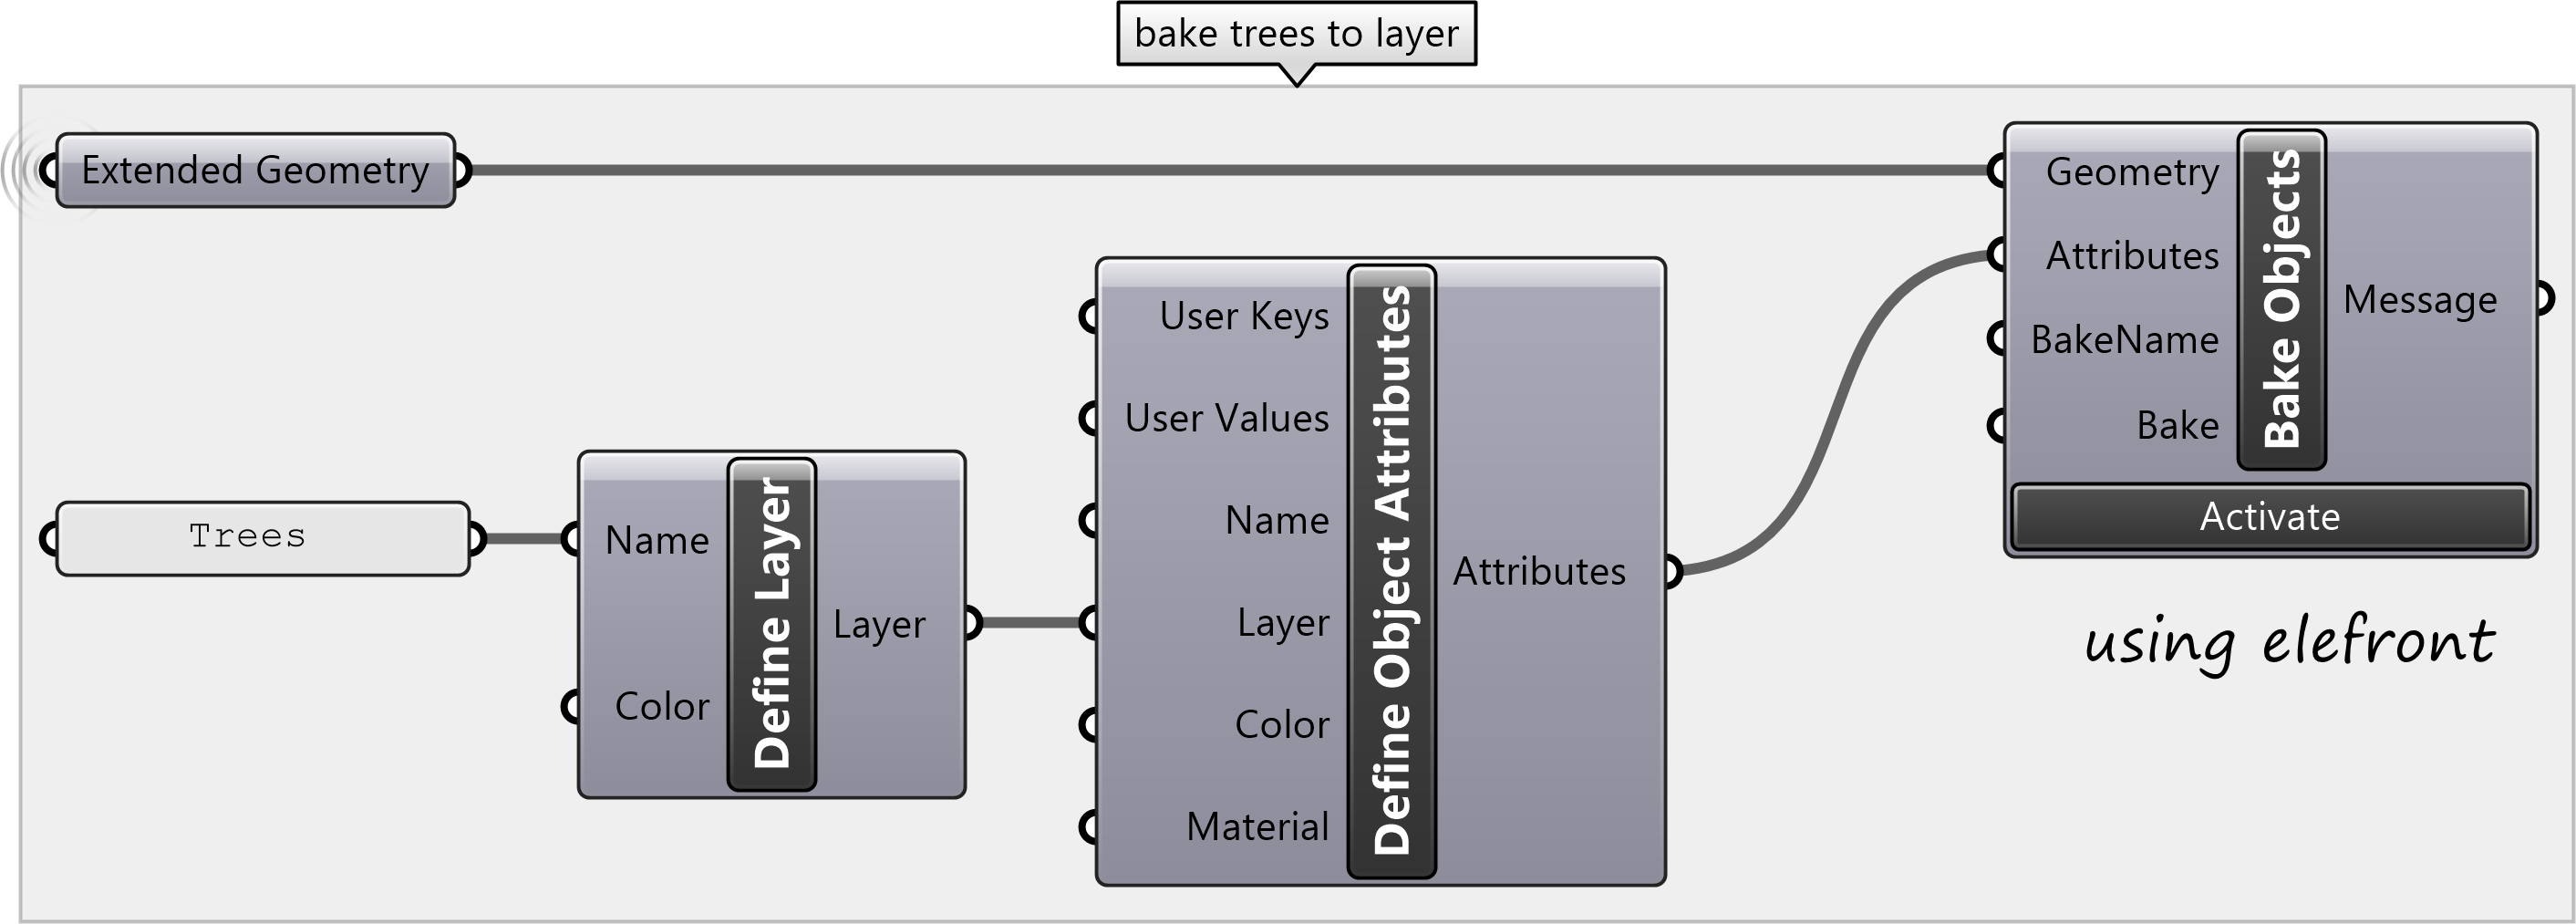 Grasshopper program for baking a tree to a new layer